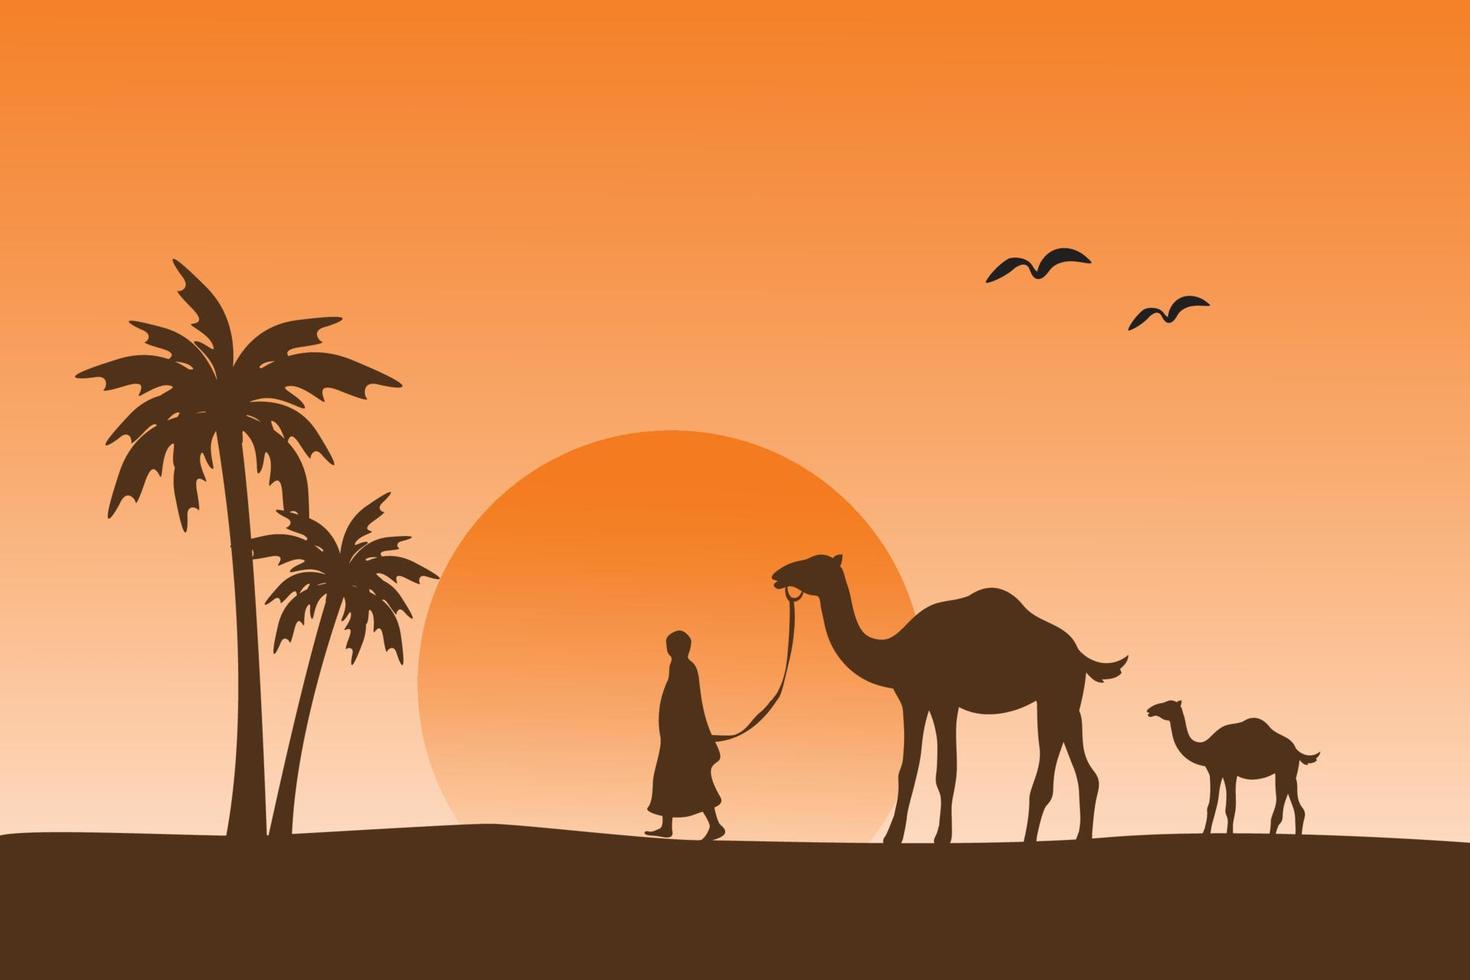 person leading the camel, islamic background illustration wallpaper, eid al adha holiday, beautiful silhouette landscape, sand desert, golden sunlight, vector graphic